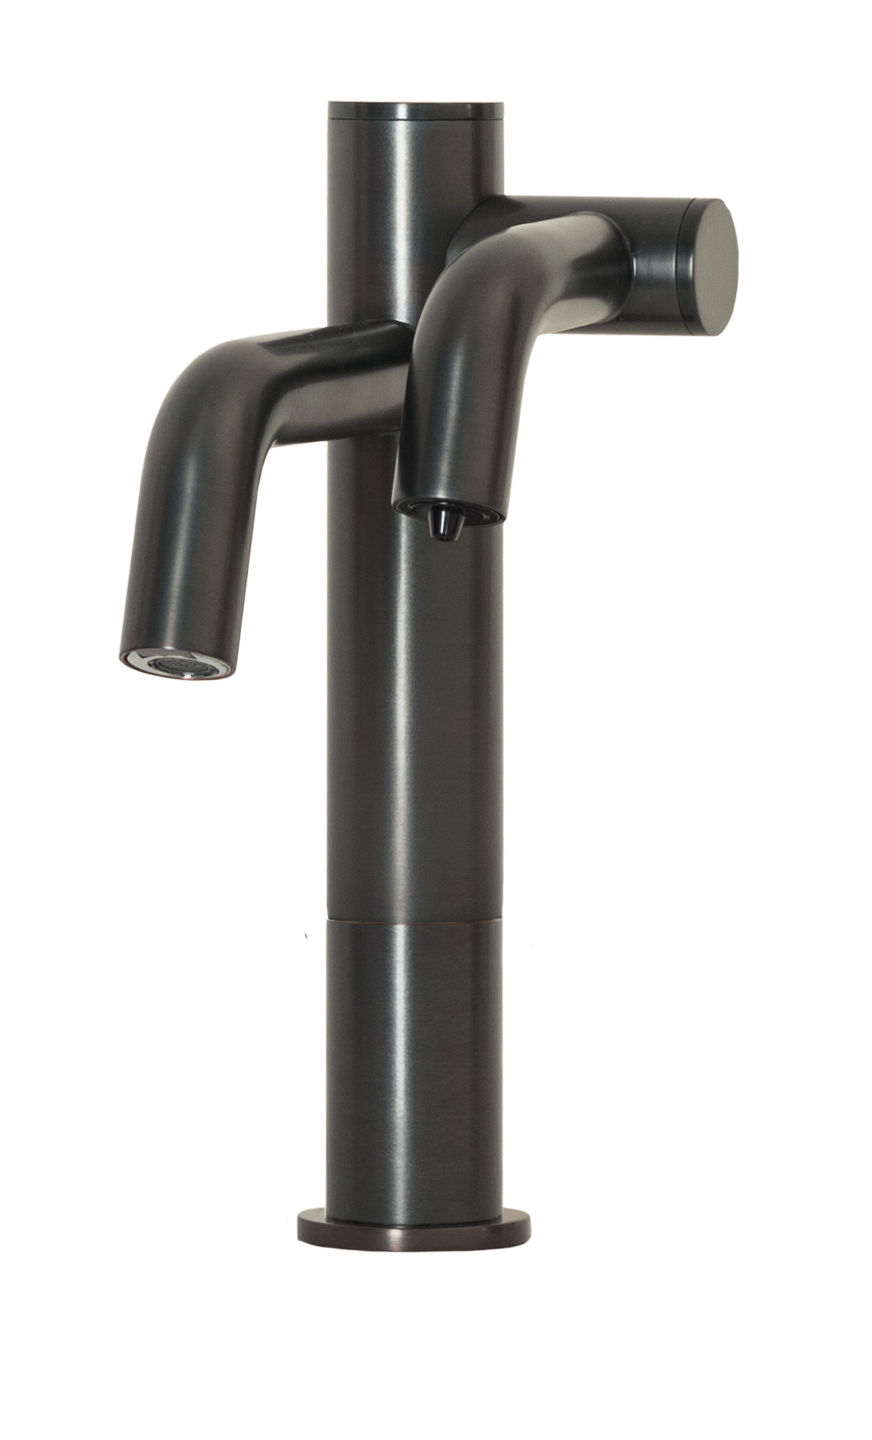 Two-in-One Automatic Faucet and Automatic Soap Dispenser For Vessel Sink Applications In Oil Rubbed Bronze